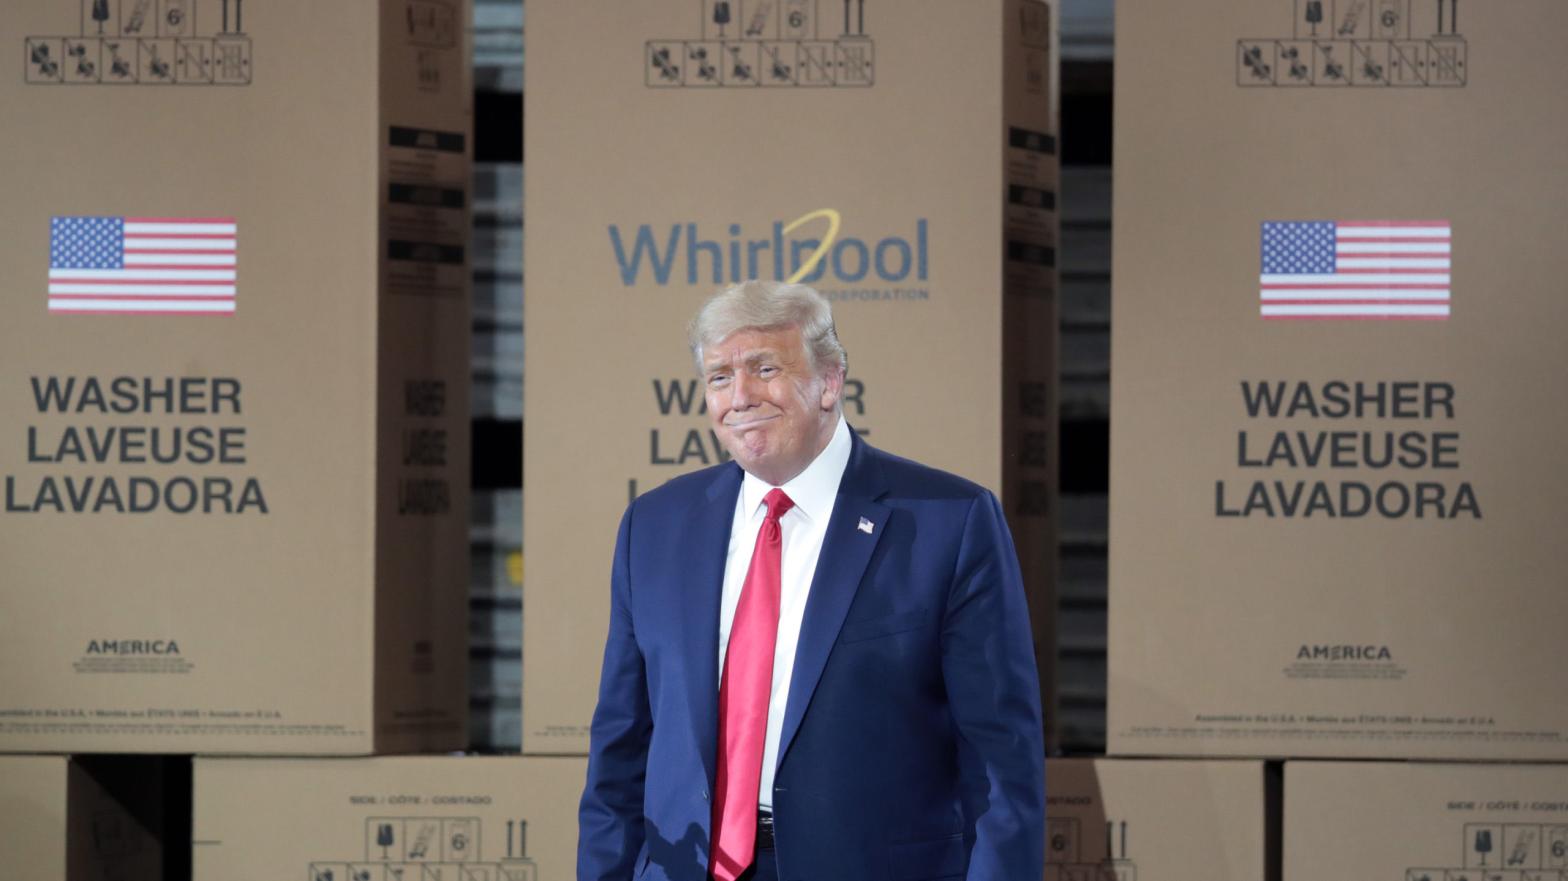 President Donald Trump in front of washing machines at Whirlpool facility in Clyde, Ohio. (Photo: Scott Olson, Getty Images)